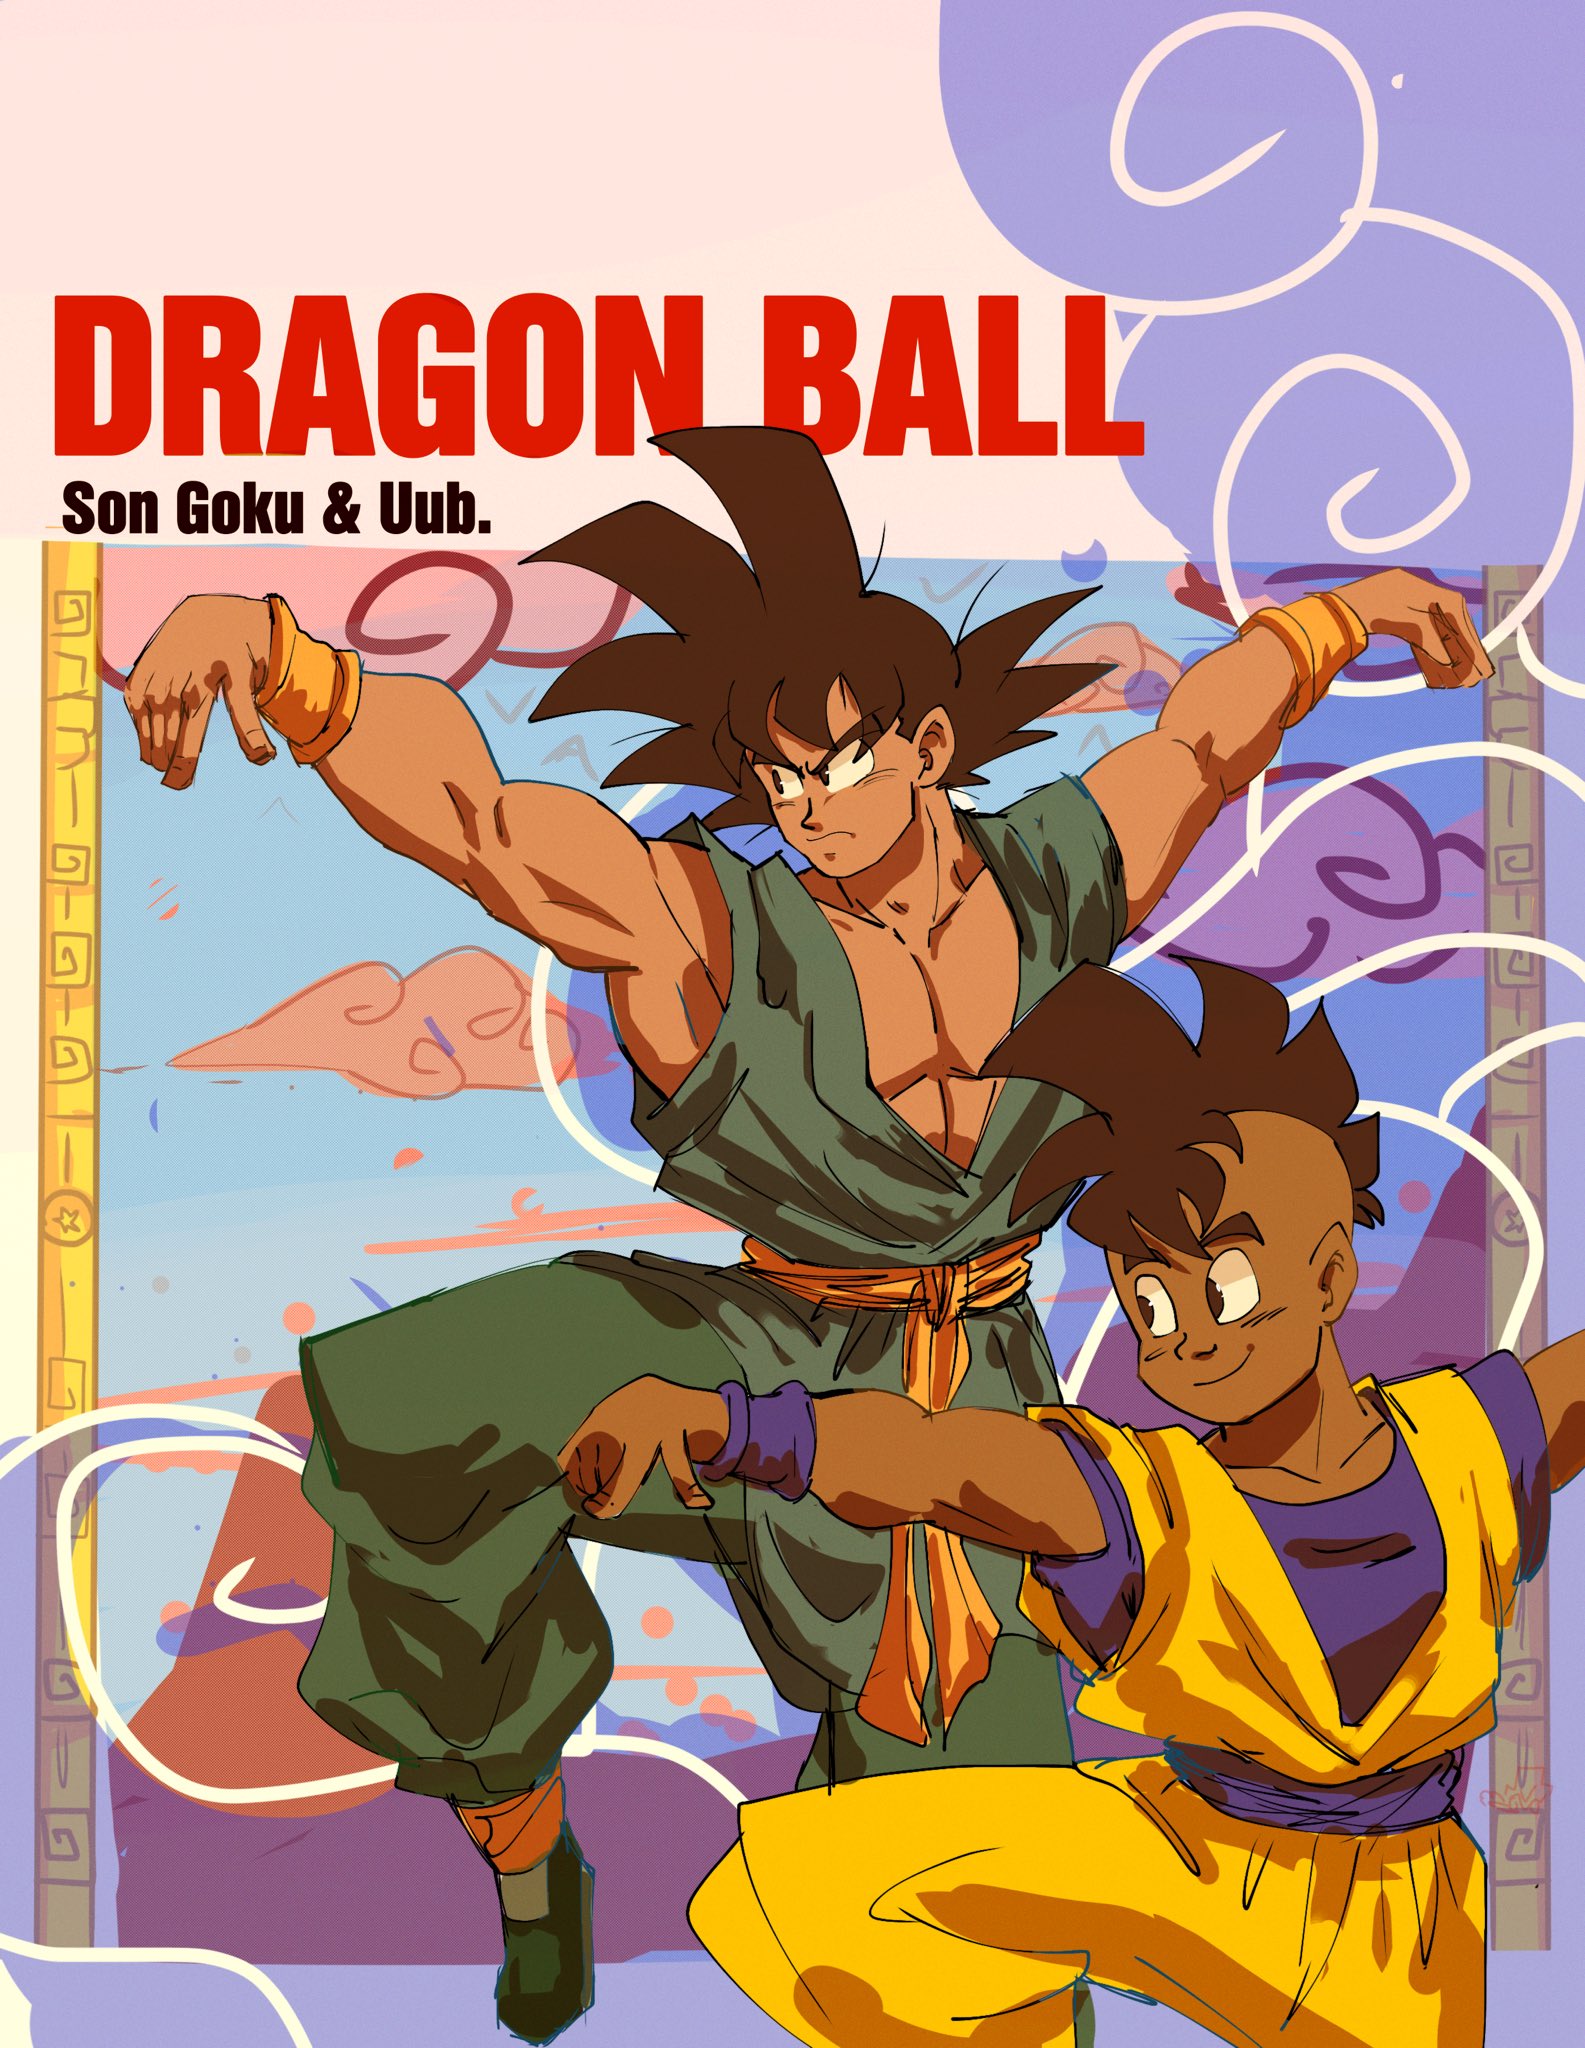 son goku and uub (dragon ball and 2 more) drawn by batm_andrew